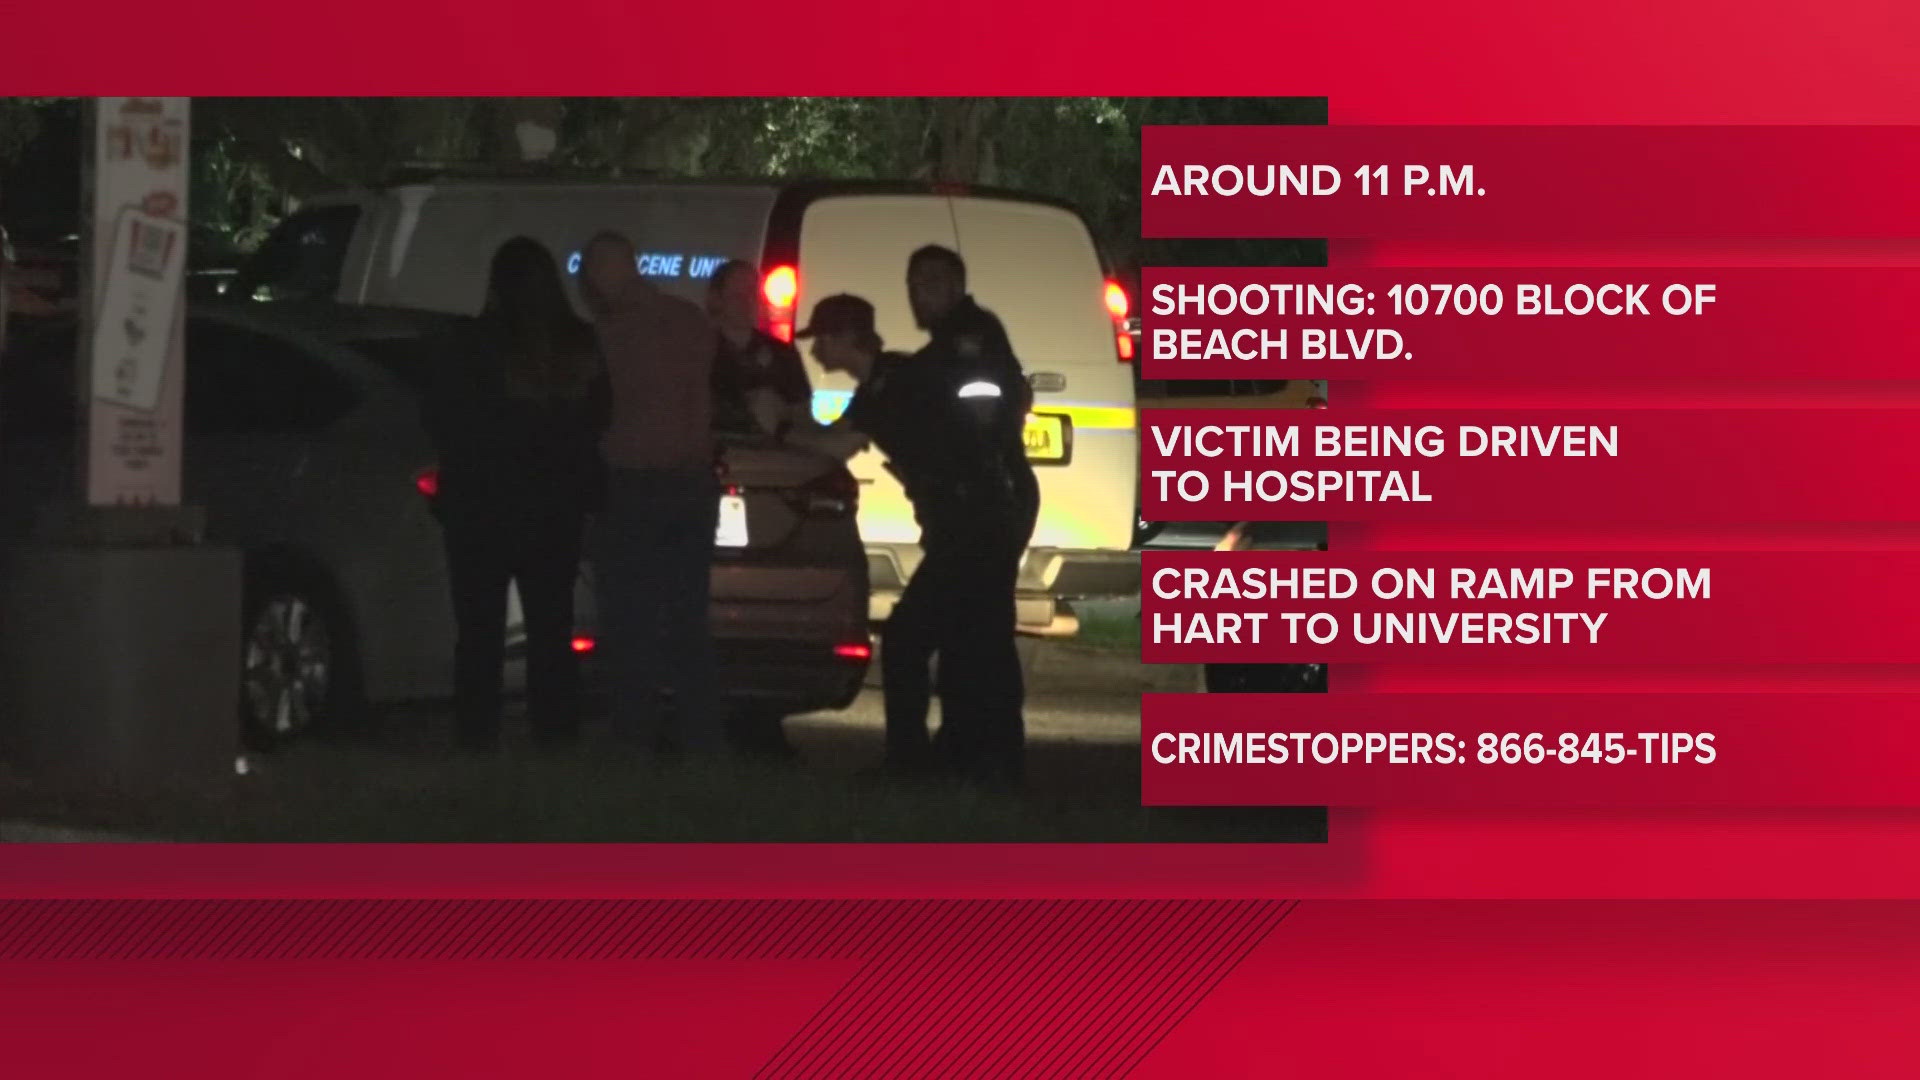 The Jacksonville Sheriff's Office says the altercation happened in the 10700 block of Beach Boulevard Tuesday night.